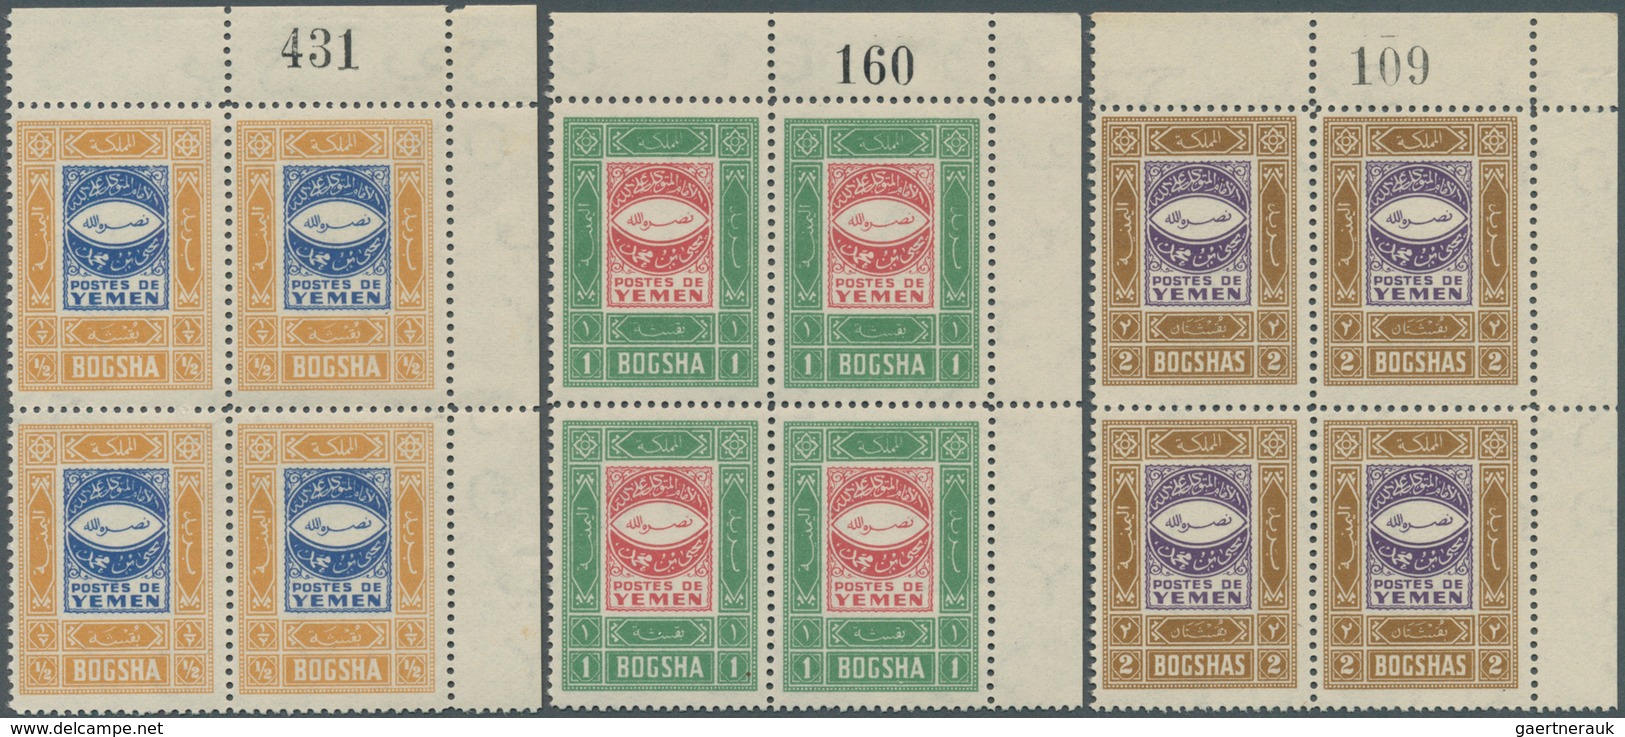 Jemen: 1940, Definitives "Ornaments", ½b. To 1i., Complete Set Of 13 Values As Plate Blocks From The - Jemen